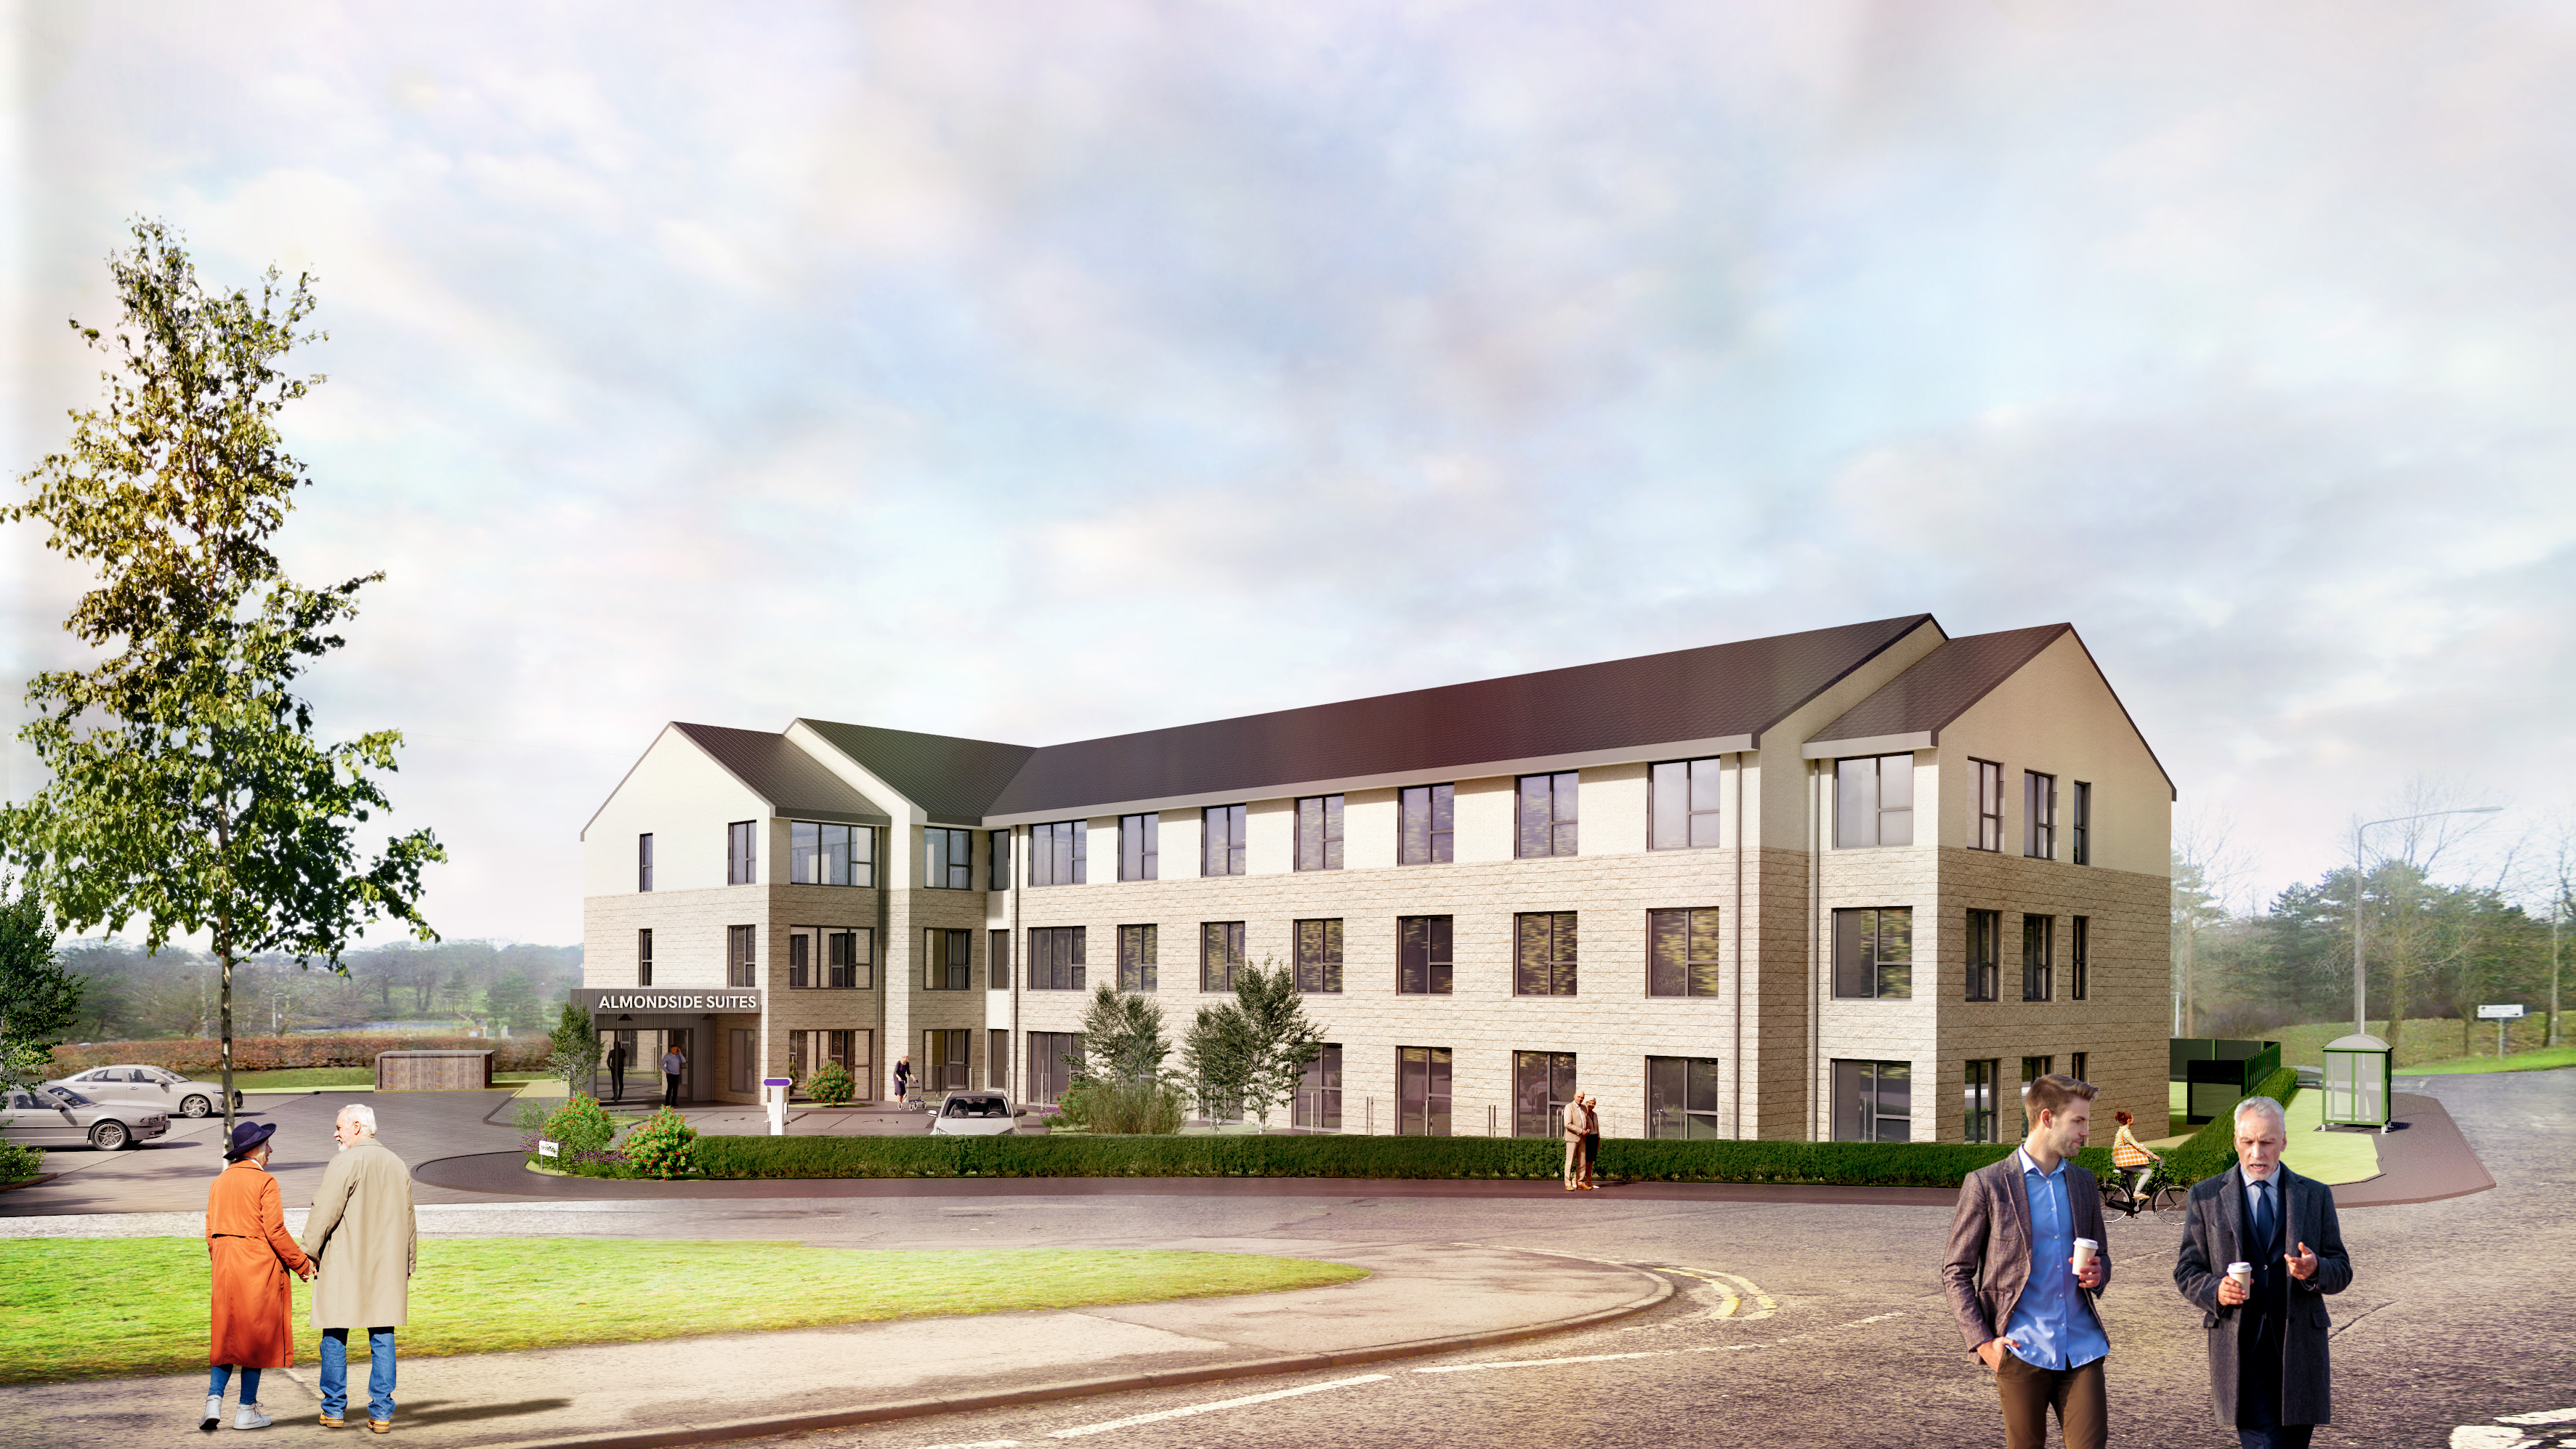 Plans submitted for new care home in Livingston